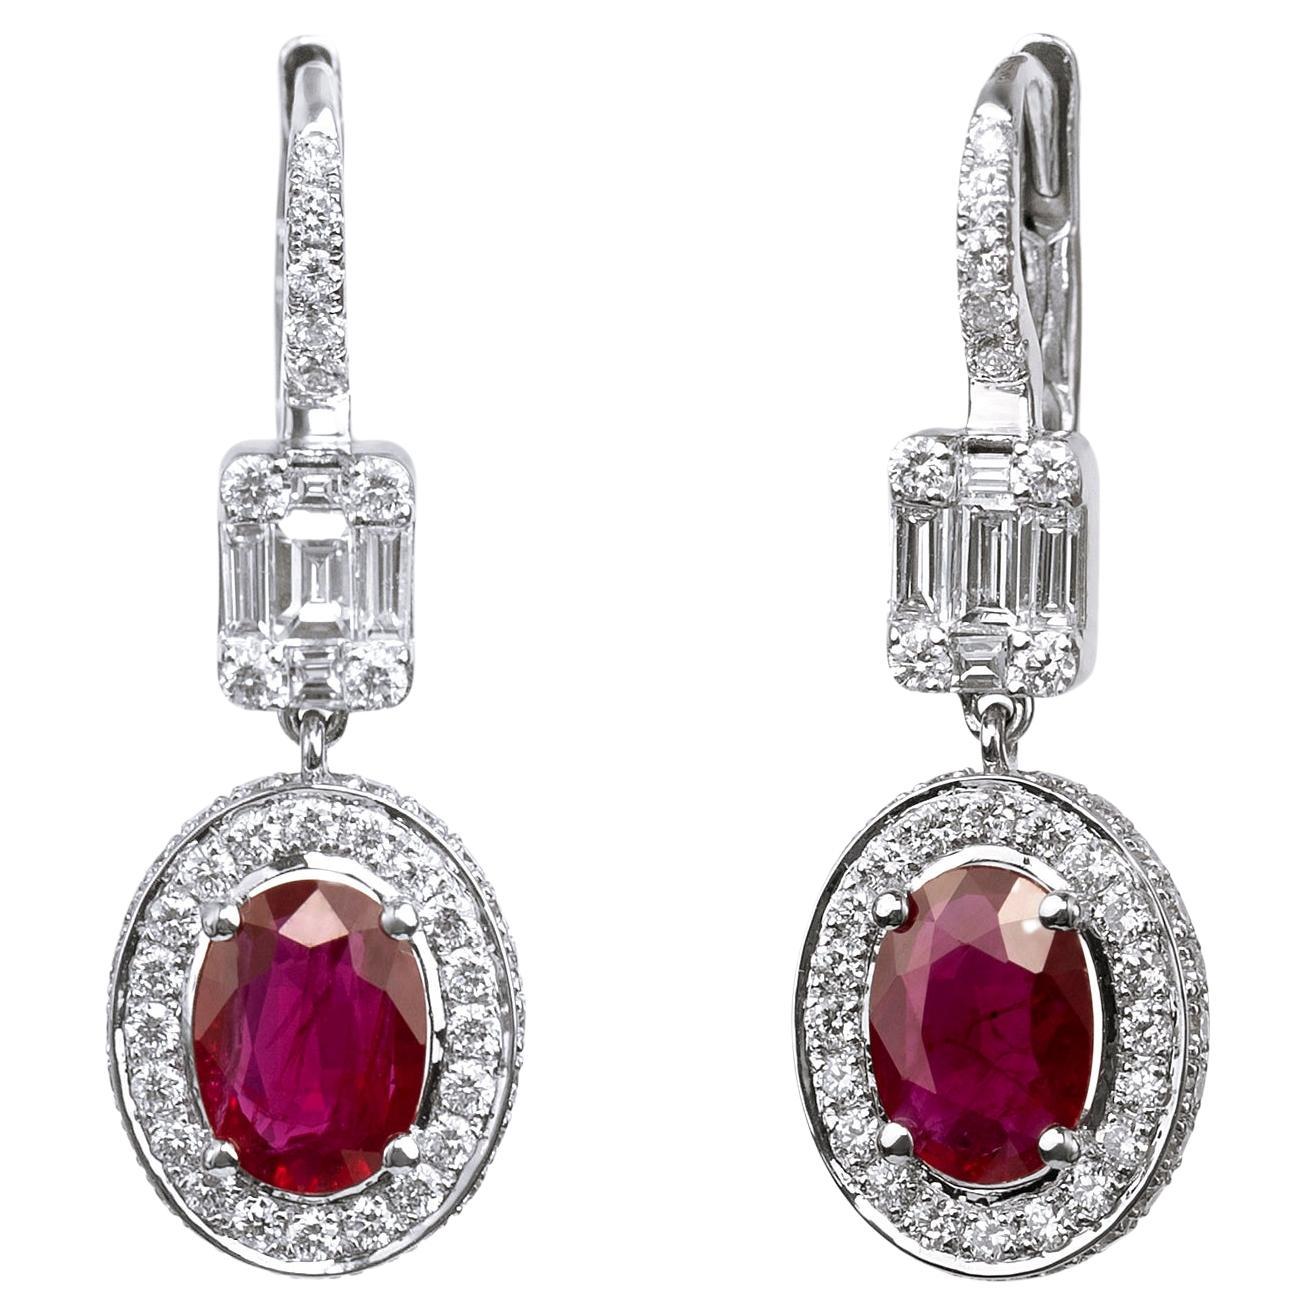 Exceptional oval natural ruby diamond dangle earrings, halo diamond in 18k gold